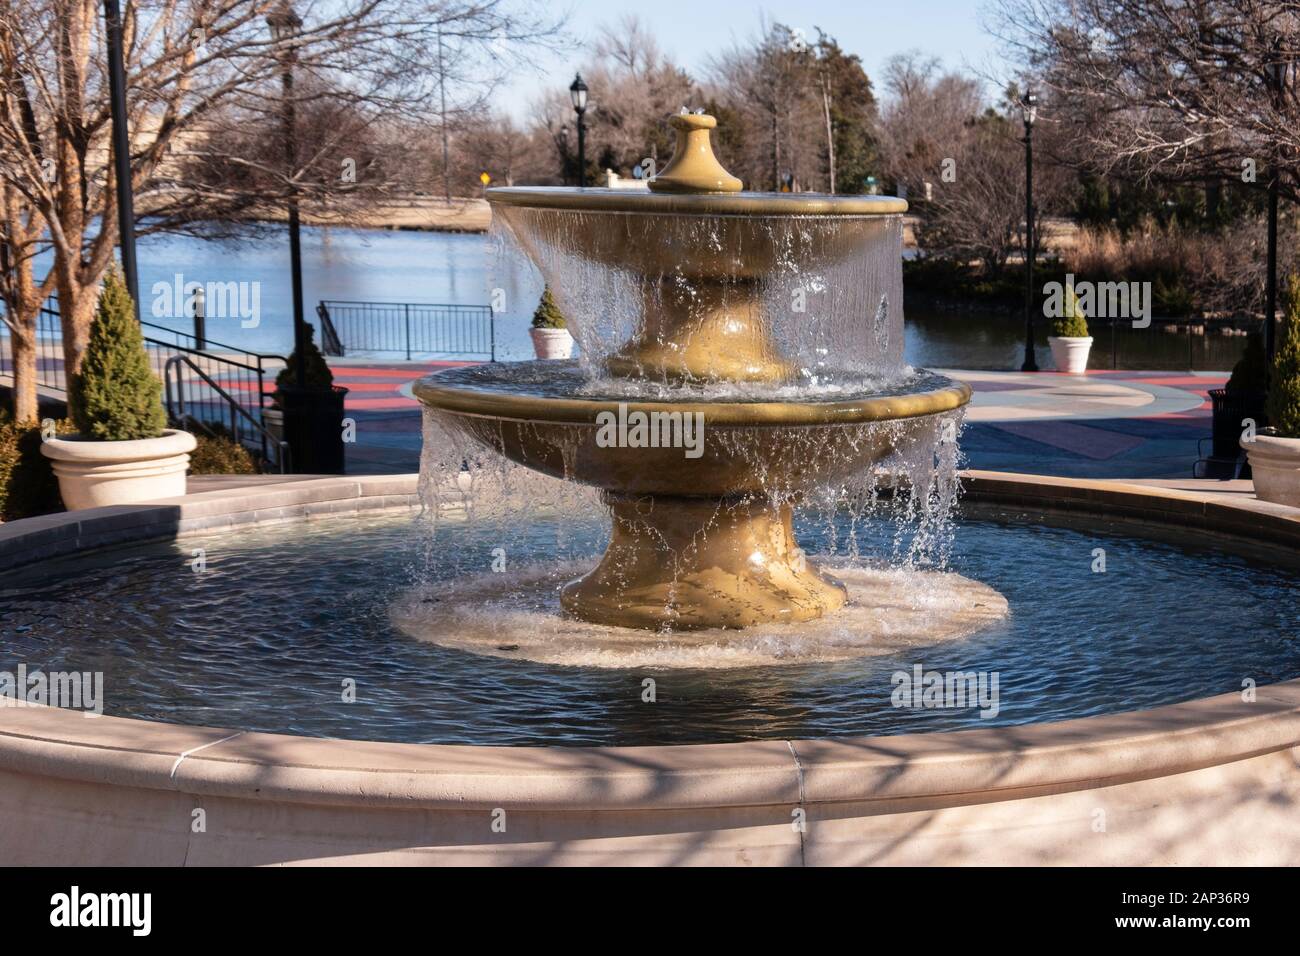 A large two-tiered fountain in a plaza by a lake. Bradley Fair mall plaza, Wichita, Kansas, USA. Stock Photo